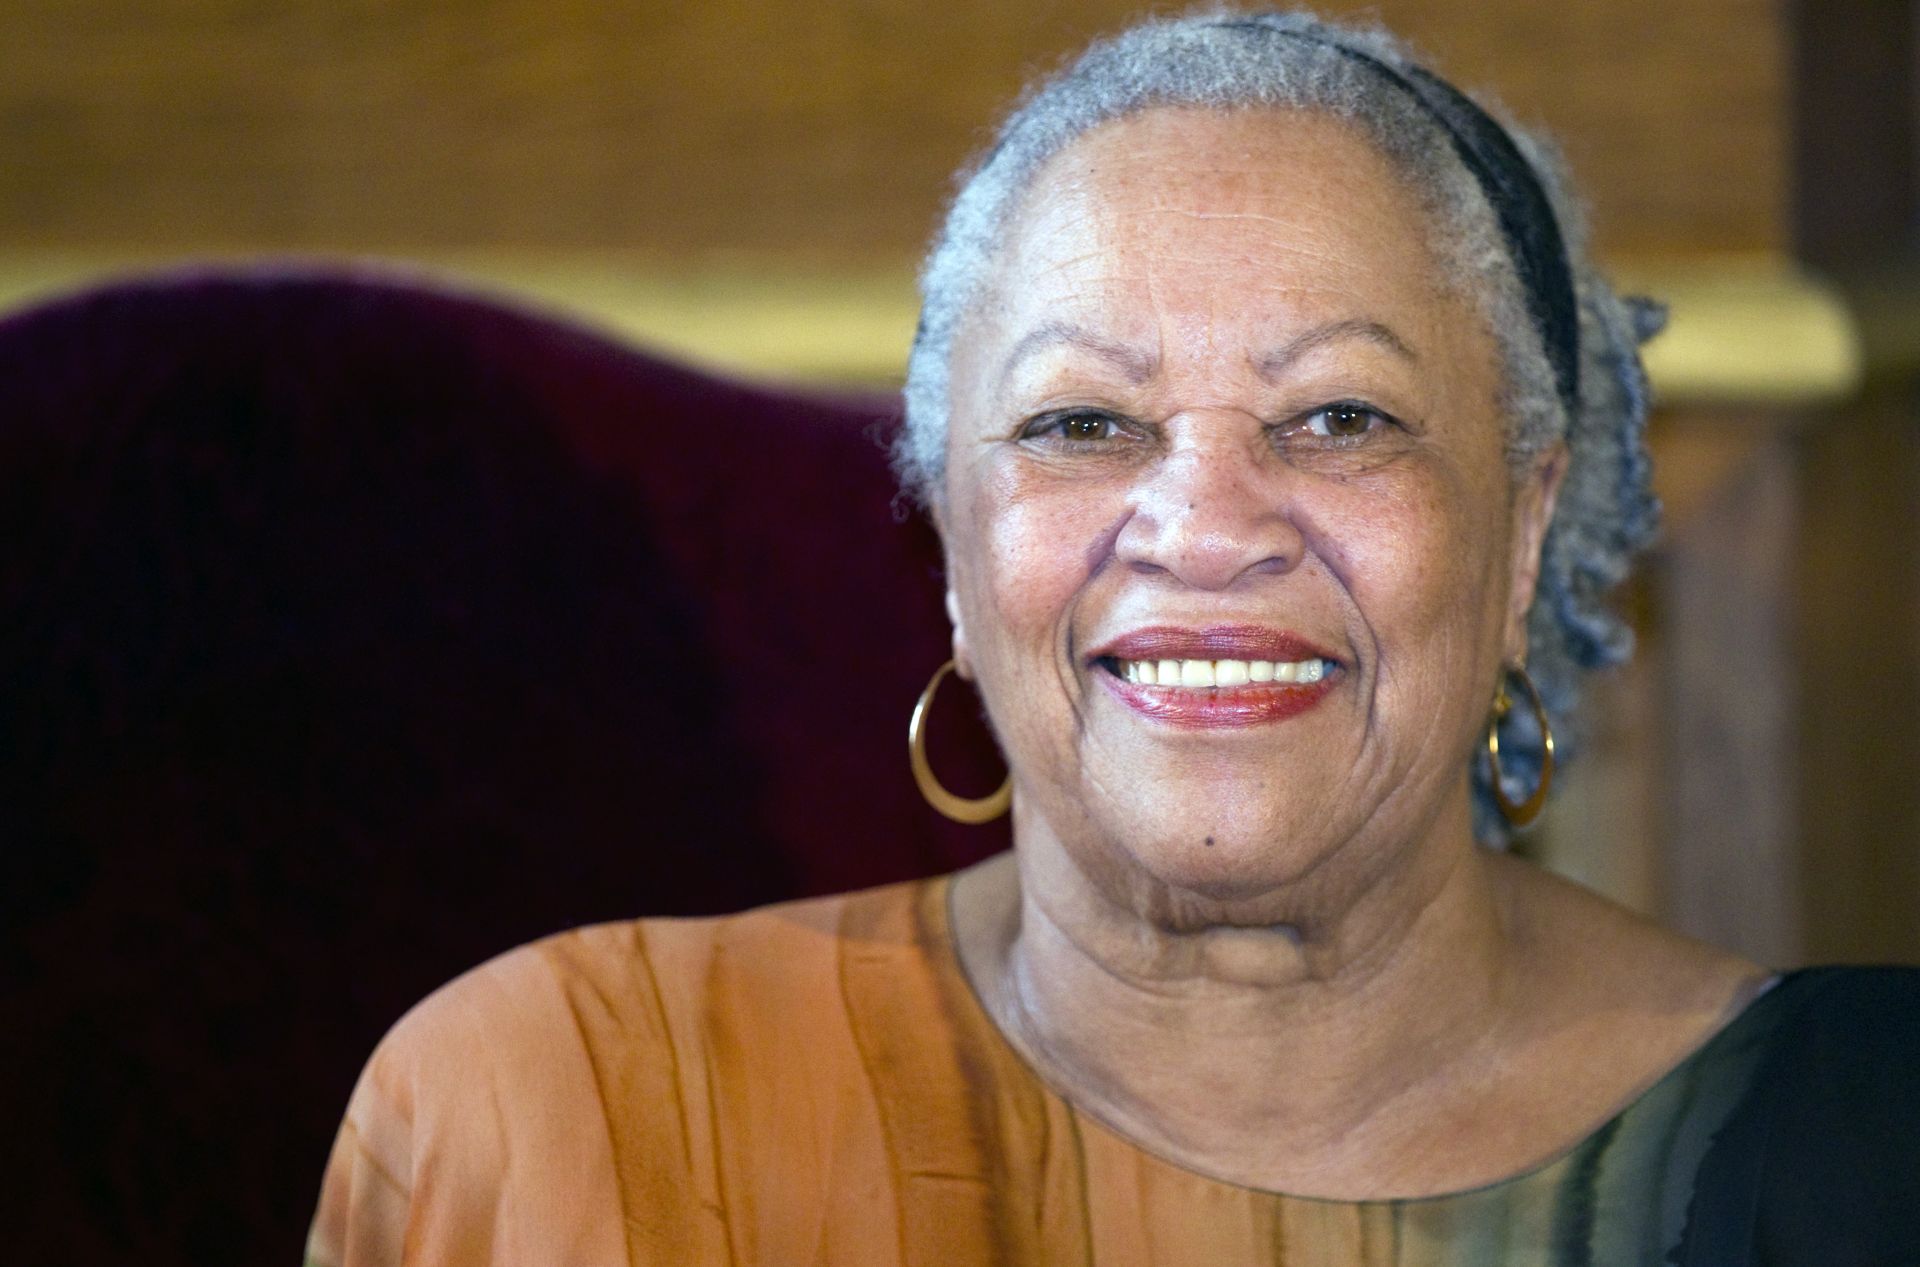 epa07759057 (FILE) - Literary Nobel prize winning US author Toni Morrison attends an award ceremony to receive the Grand Vermeil medal for her contribution to culture, at the City Hall of Paris, France, 04 November 2010 (reissued 06 August 2019). Reports on 06 August 2019 state Toni Morrison has died, aged 88. Morrison, winner of the Nobel Prize for Literature, was the first African American woman to win the prize.  EPA/IAN LANGSDON *** Local Caption *** 02429734